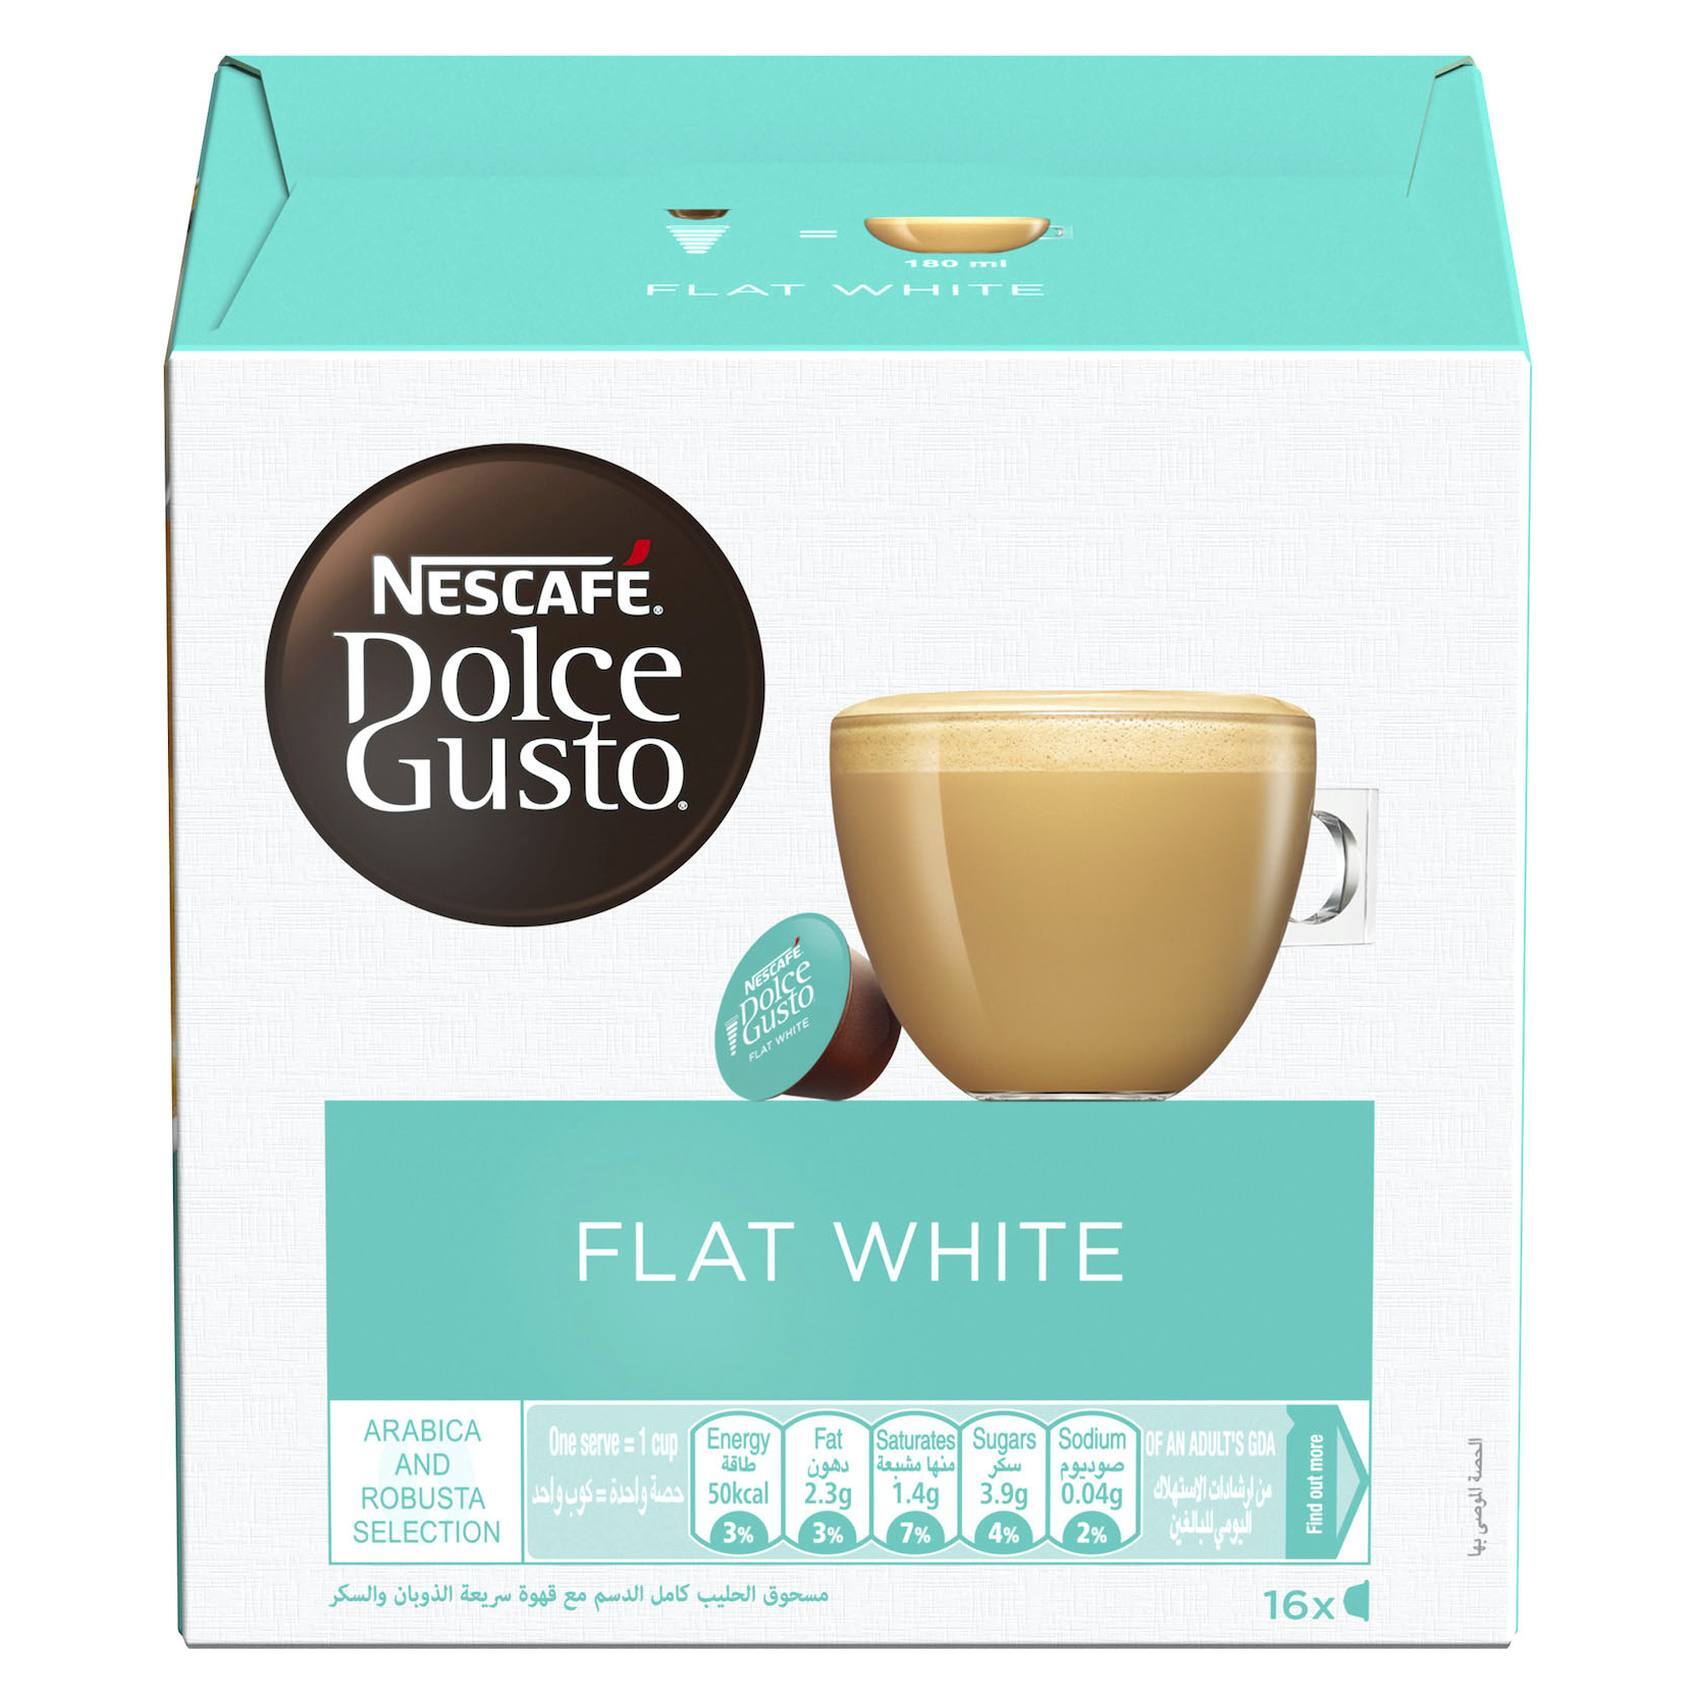 Lang land privaat Buy Nescafe Dolce Gusto Flat White Coffee 16 Capsules Online - Shop  Beverages on Carrefour UAE